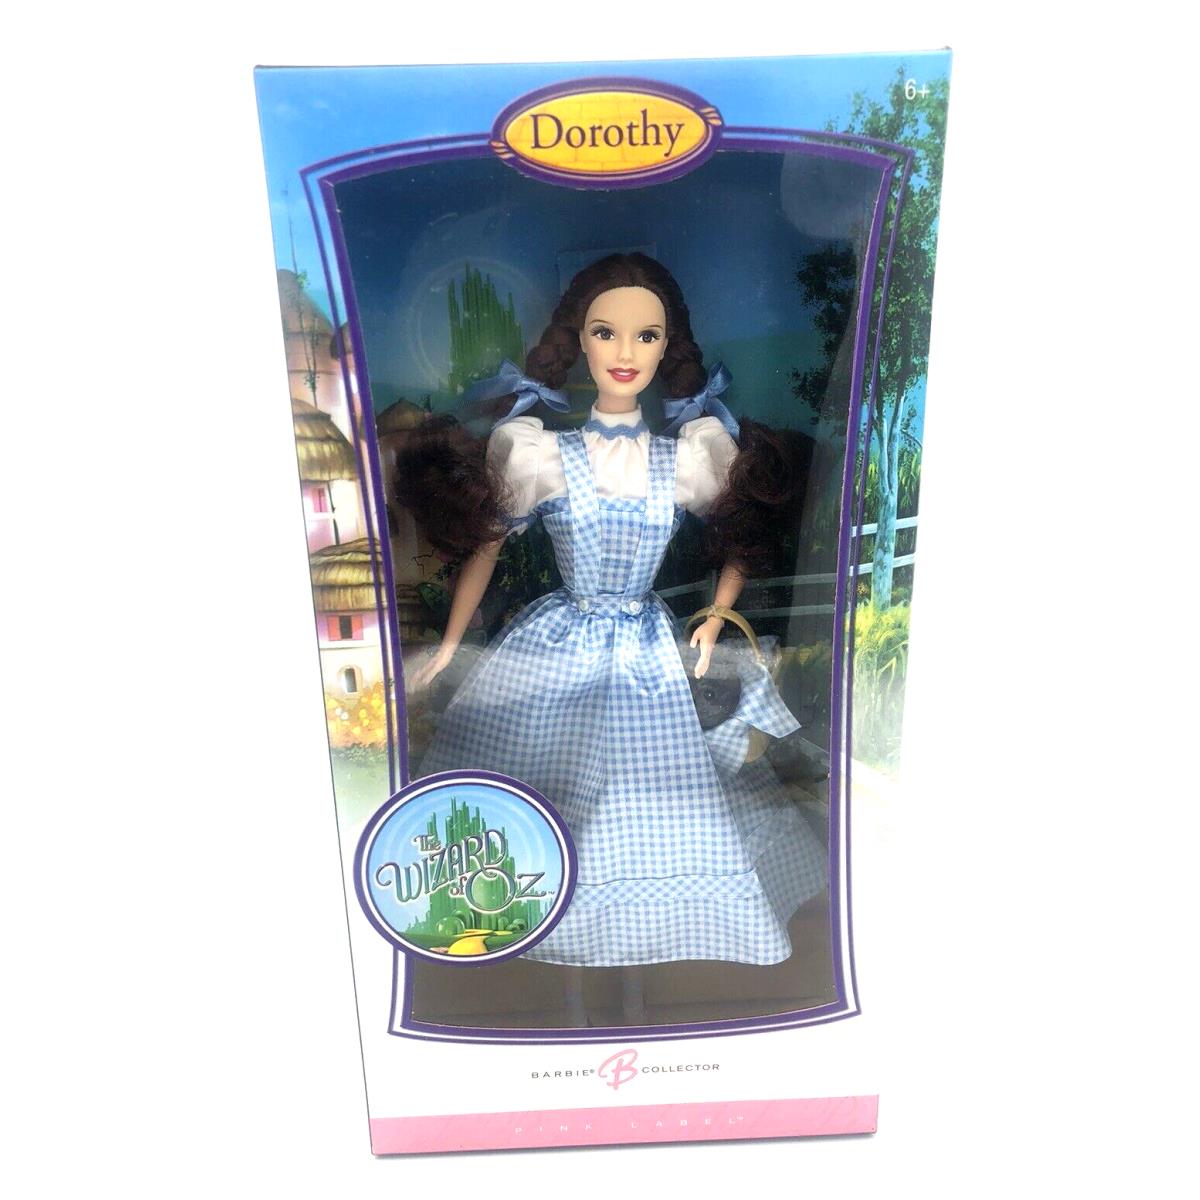 Barbie Collection - Dorothy - The Wizard Of Oz 2006 Mattel Pink Label